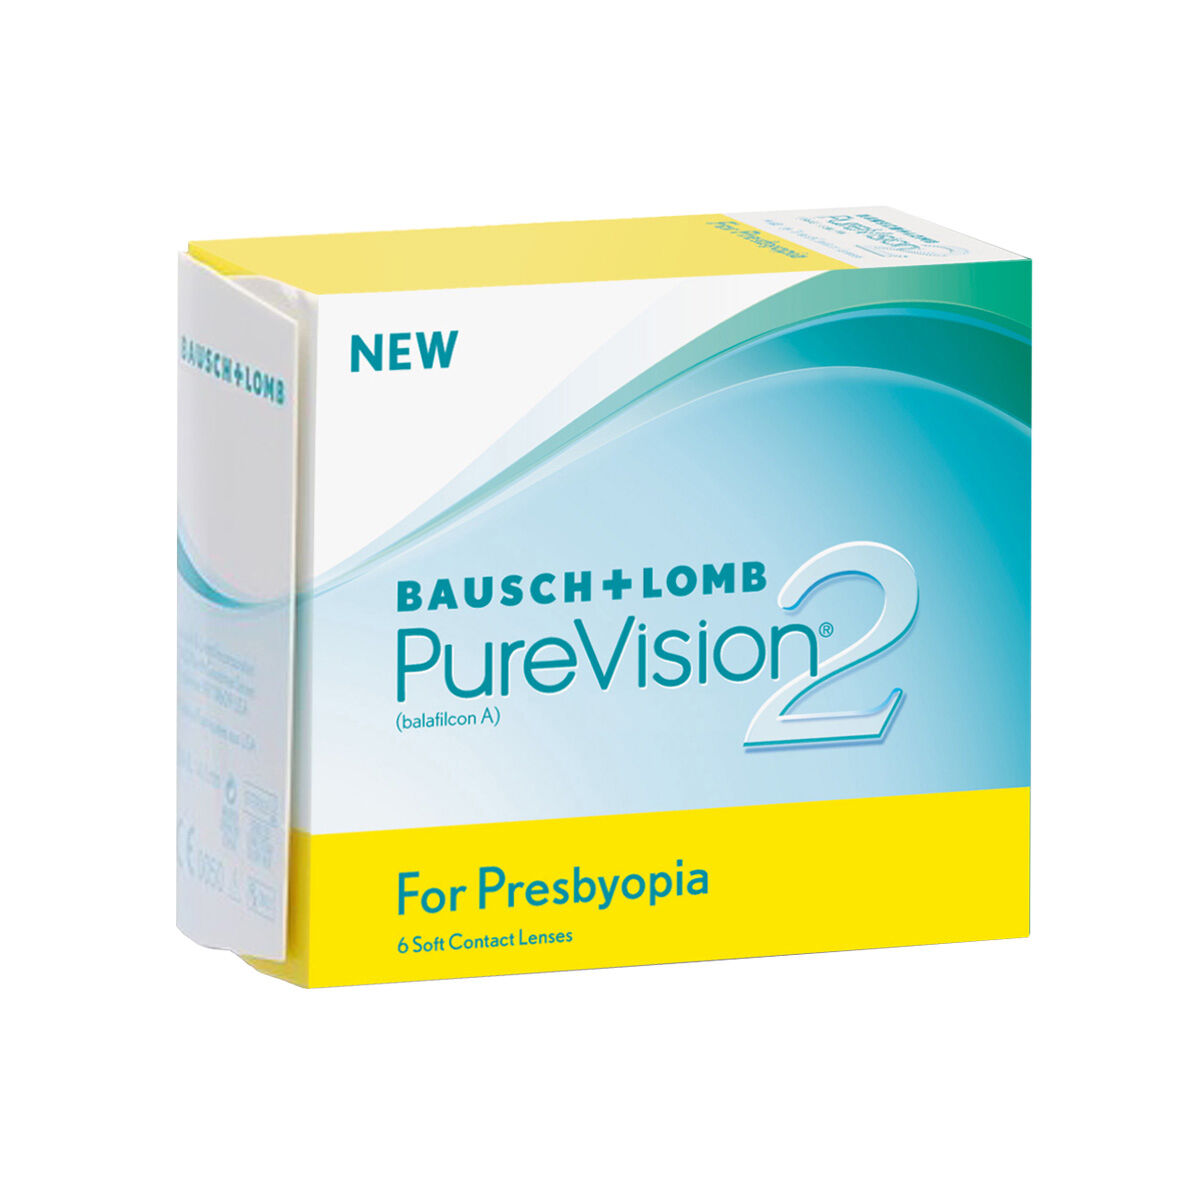 Bausch & Lomb Purevision 2 for Presbyopia (6 Contact Lenses), Bausch & Lomb, Monthly Disposables, Silicone Hydrogel